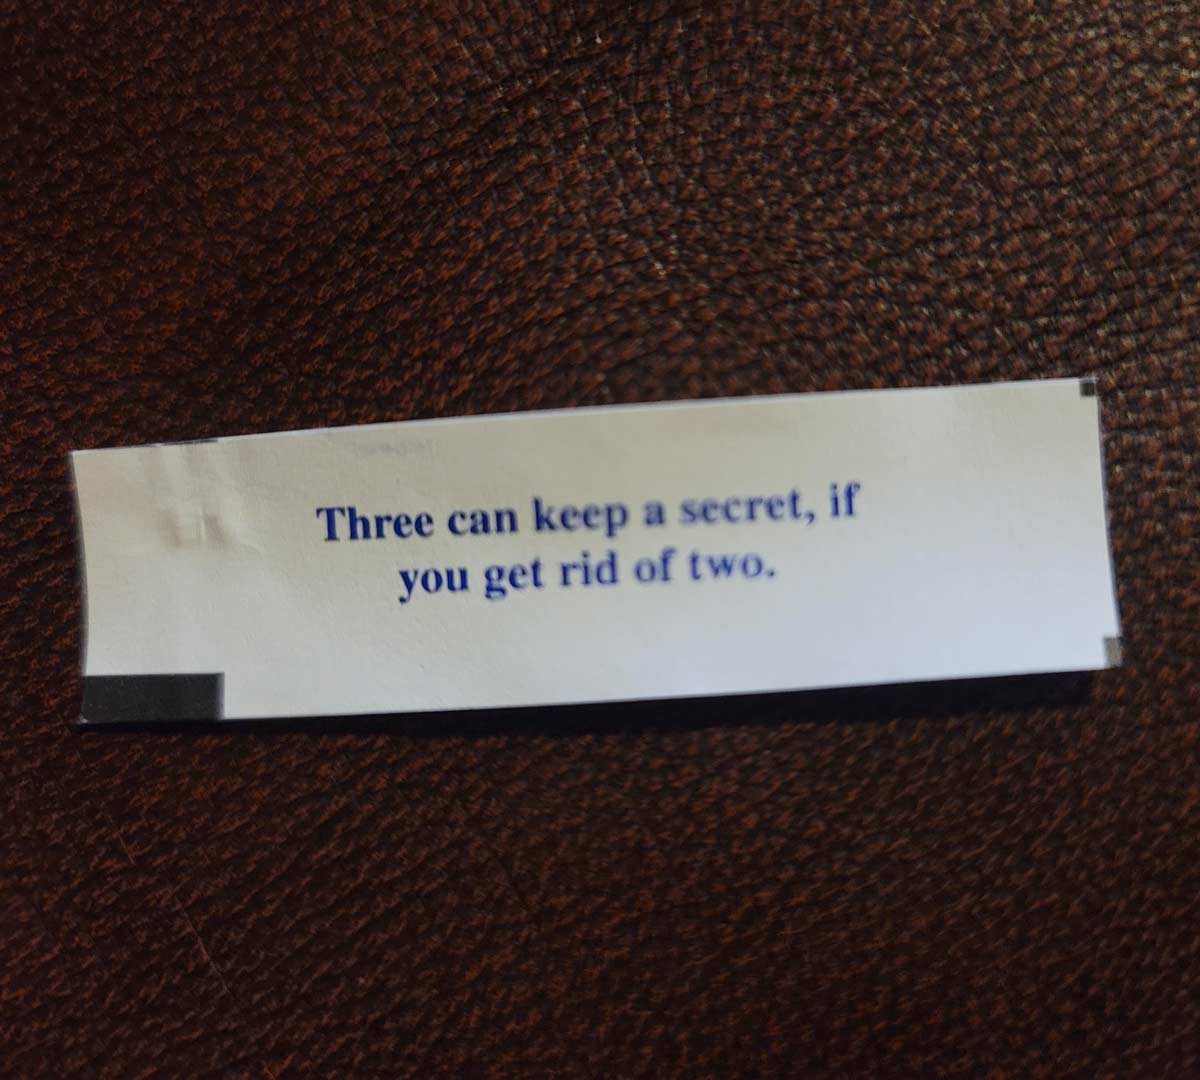 Fortune Cookie tells the truth!